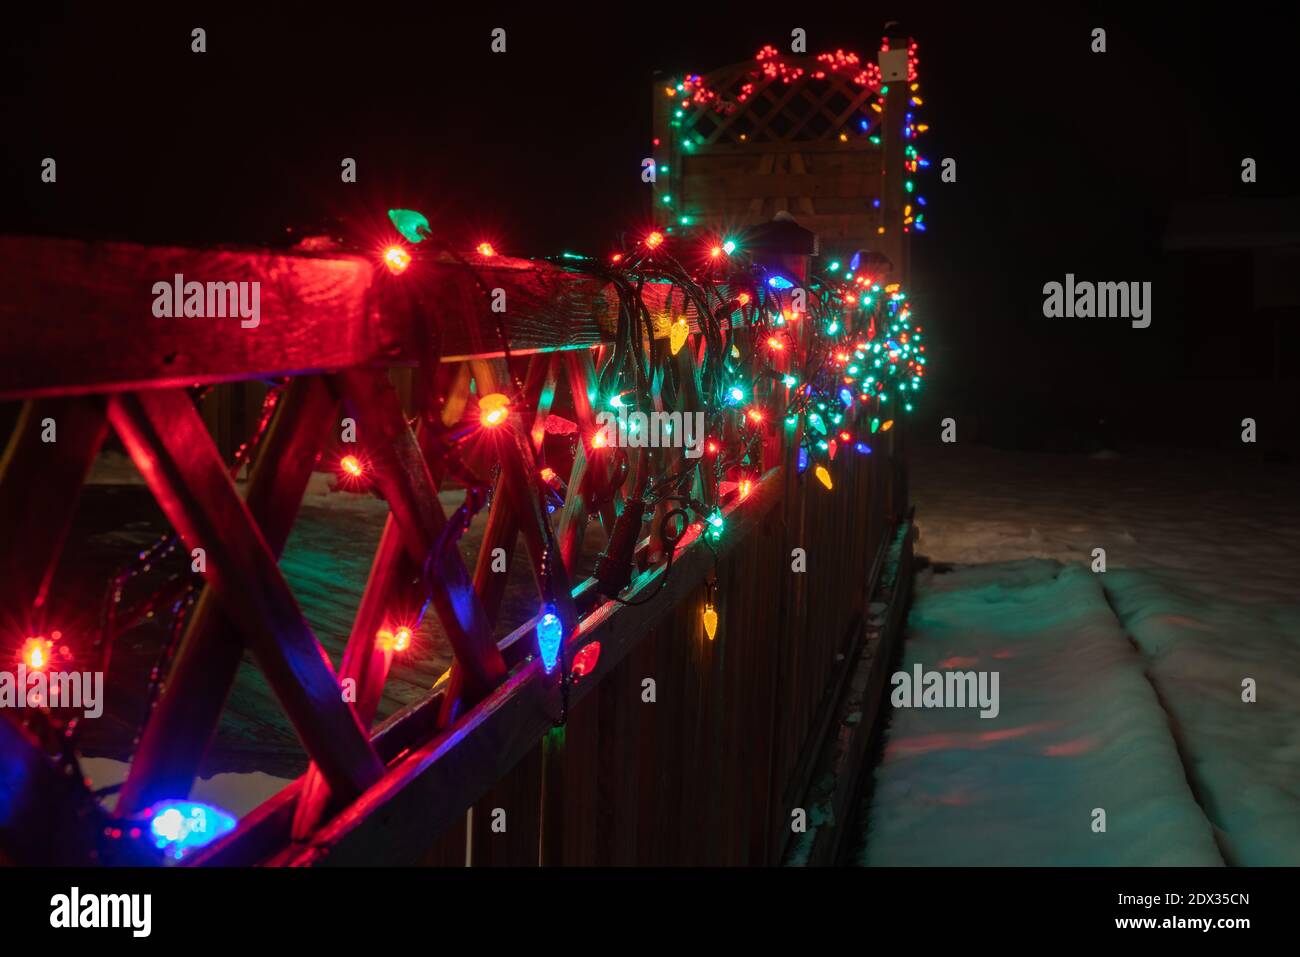 Perspective view of Real blurry Christmas Multicolored Lights on wooden terrace fence. Many flashing lamps that sequentially changes color. New year a Stock Photo